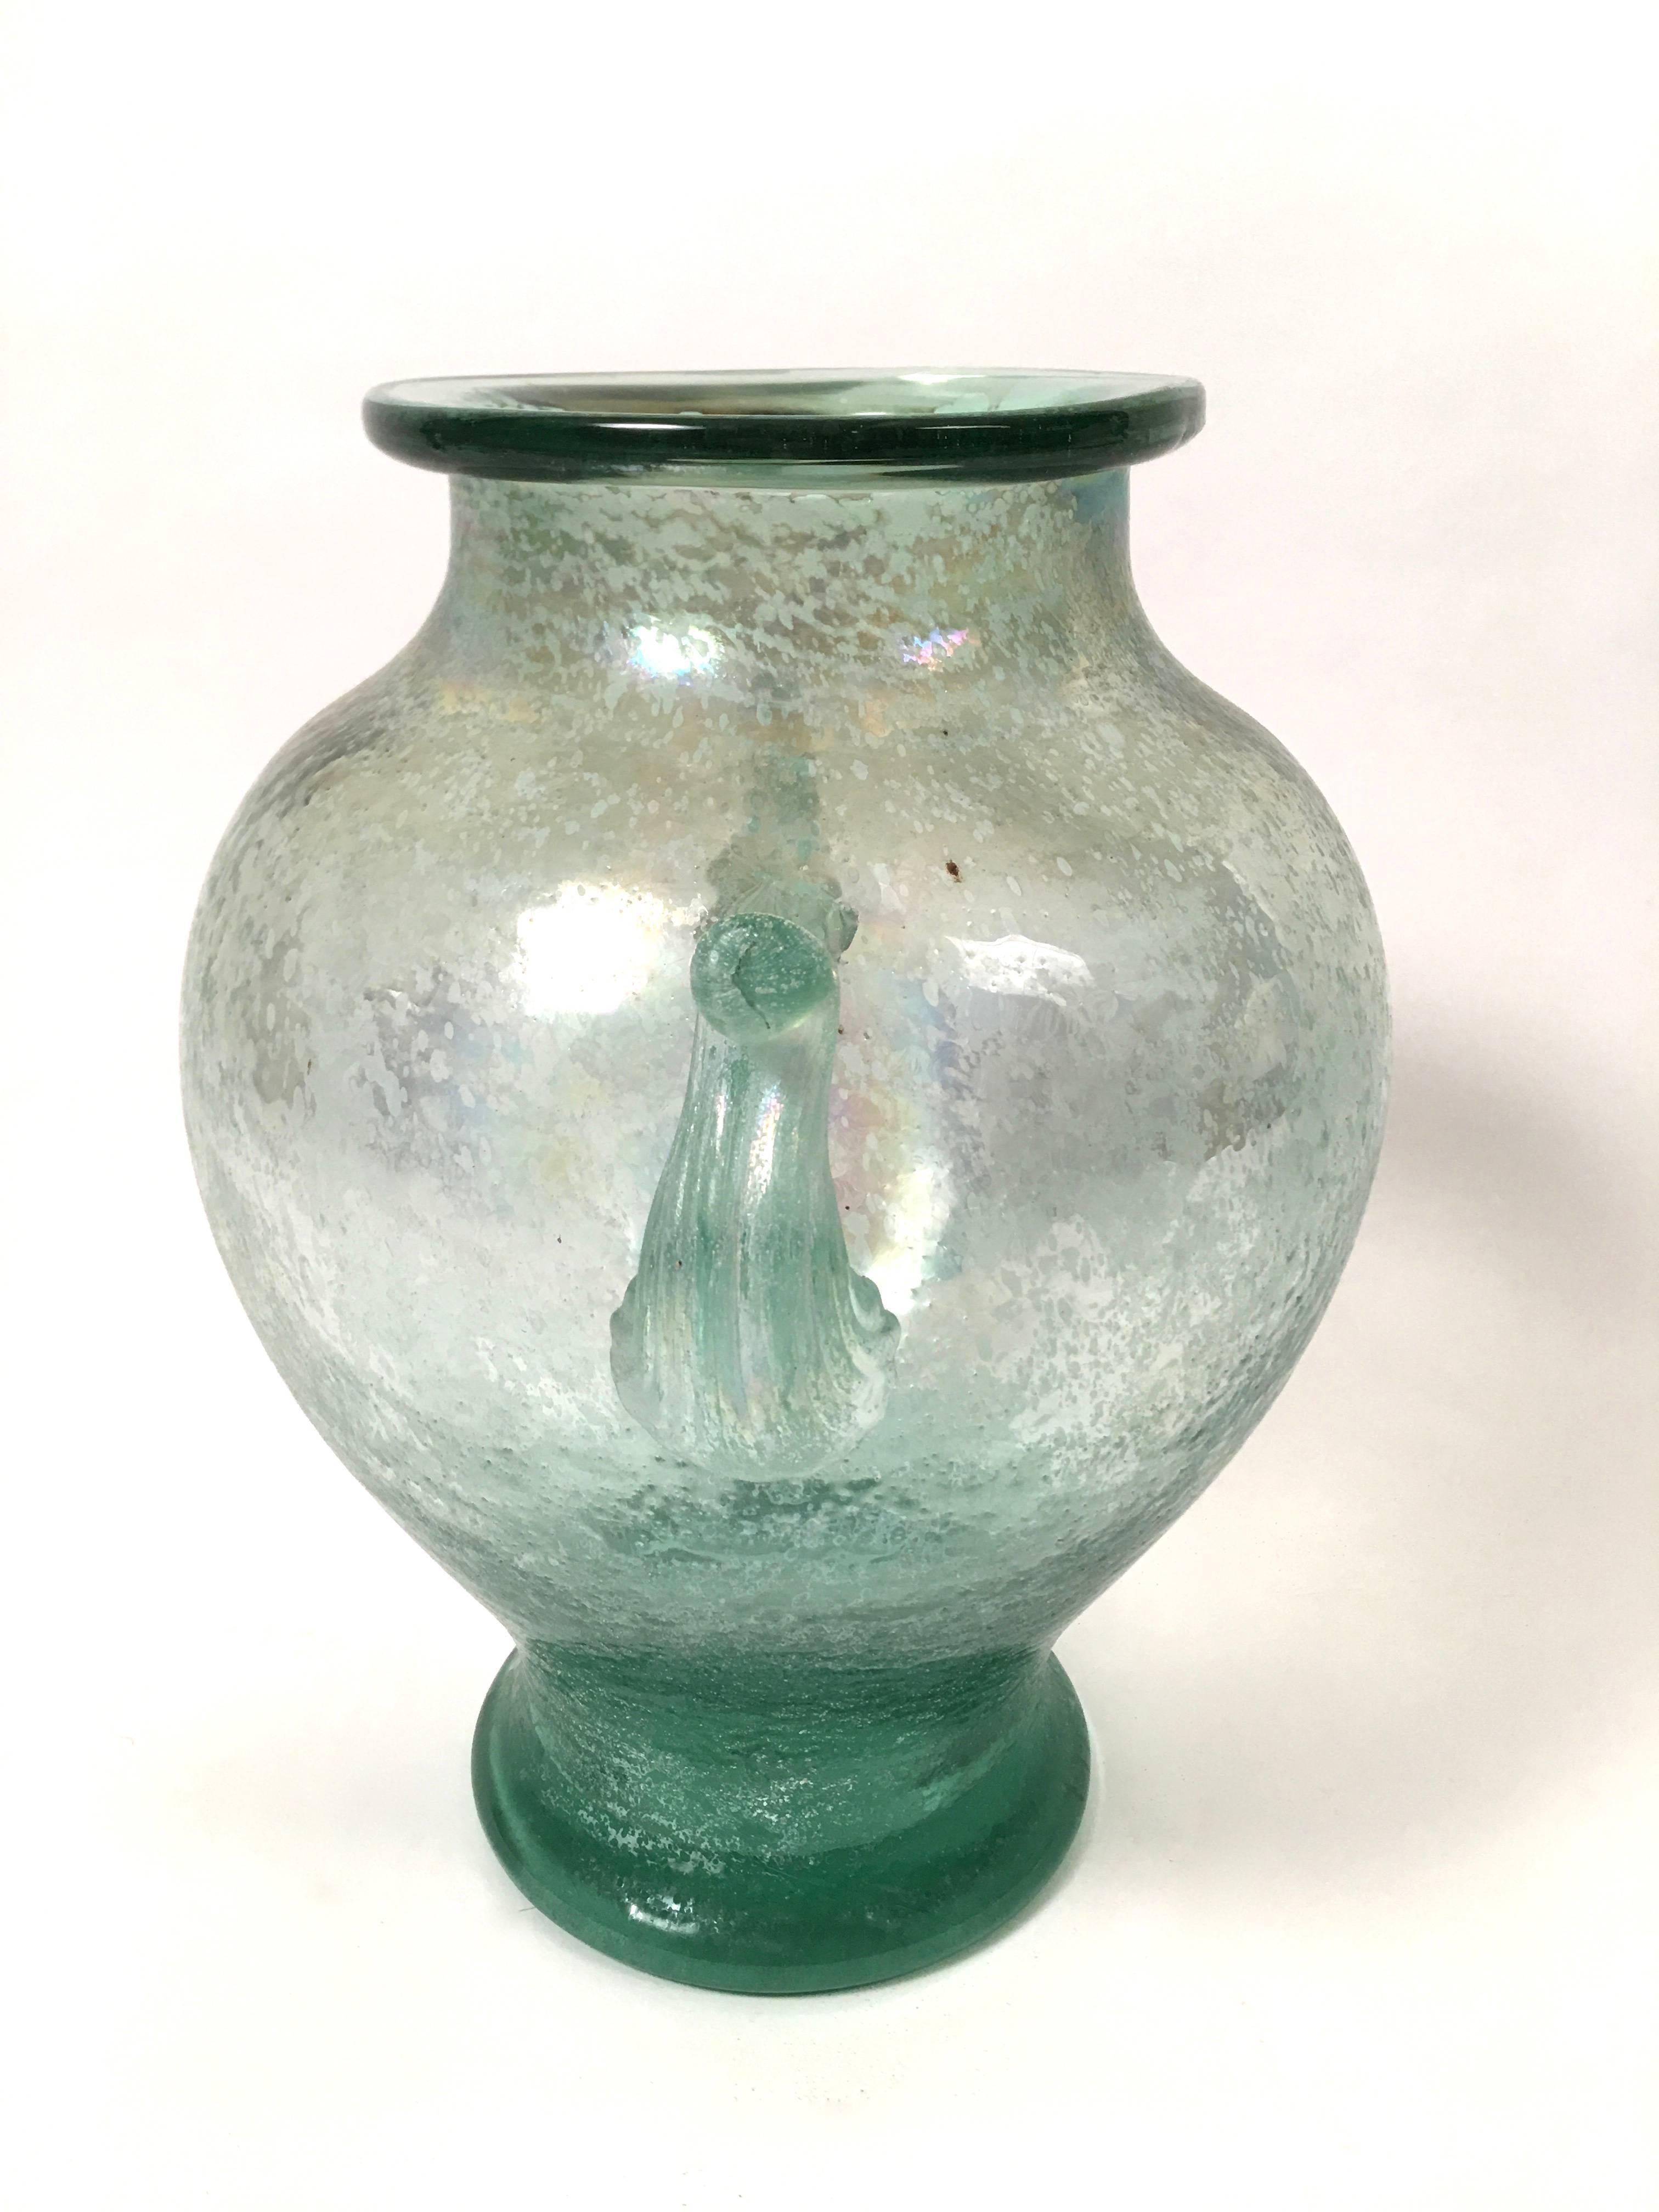 A large Murano Neoclassical  green glass vase of ovoid shape with everted rim and applied handles, in the Scavo technique, which resembles the surface of Ancient Roman glass with its textured and frosted surface.